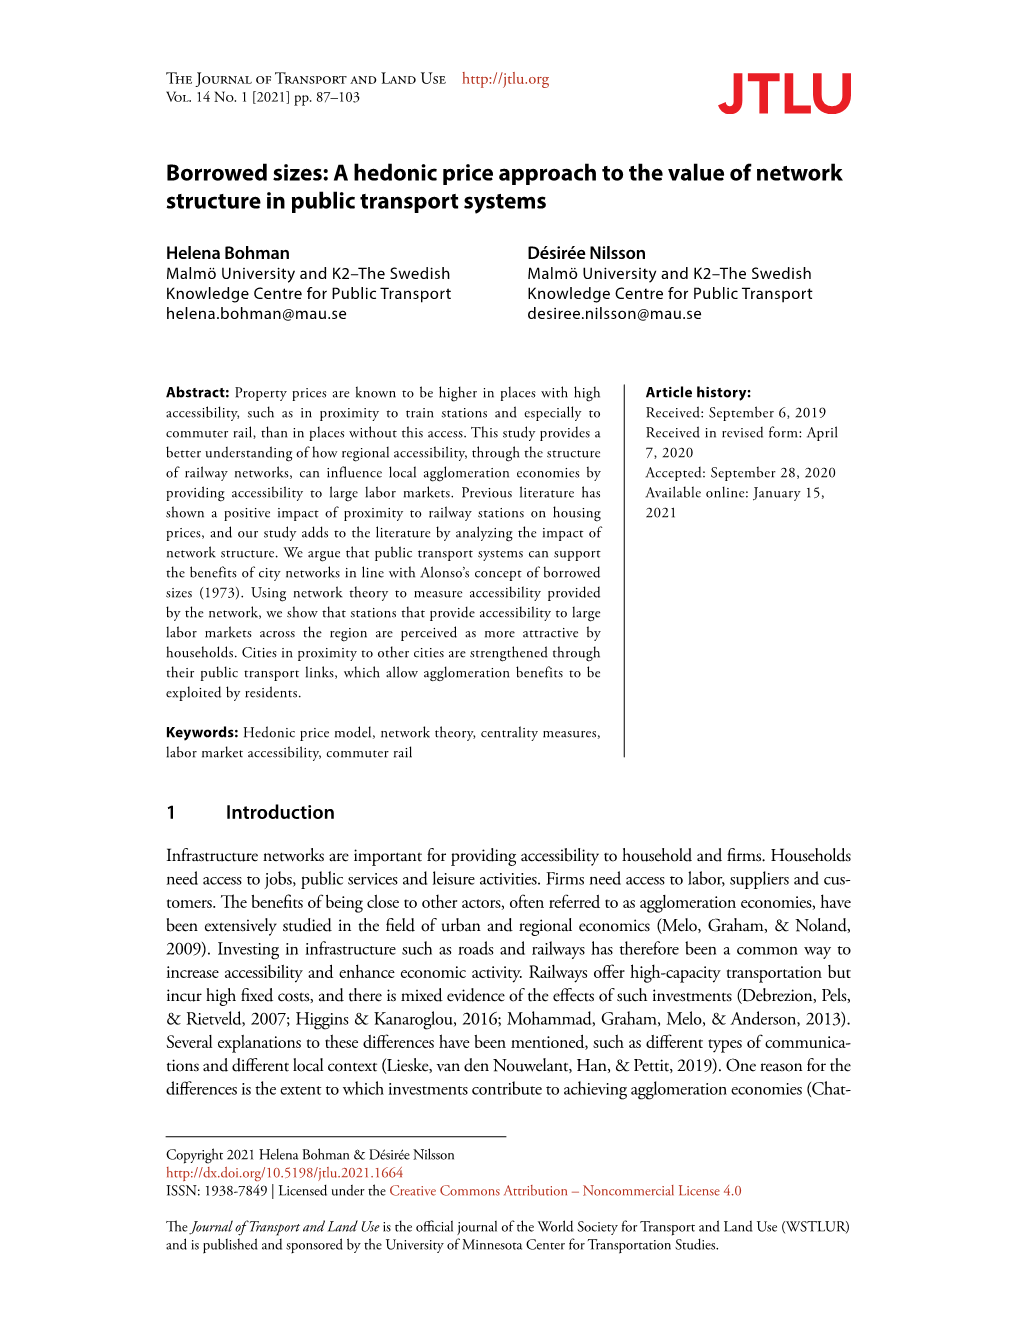 A Hedonic Price Approach to the Value of Network Structure in Public Transport Systems